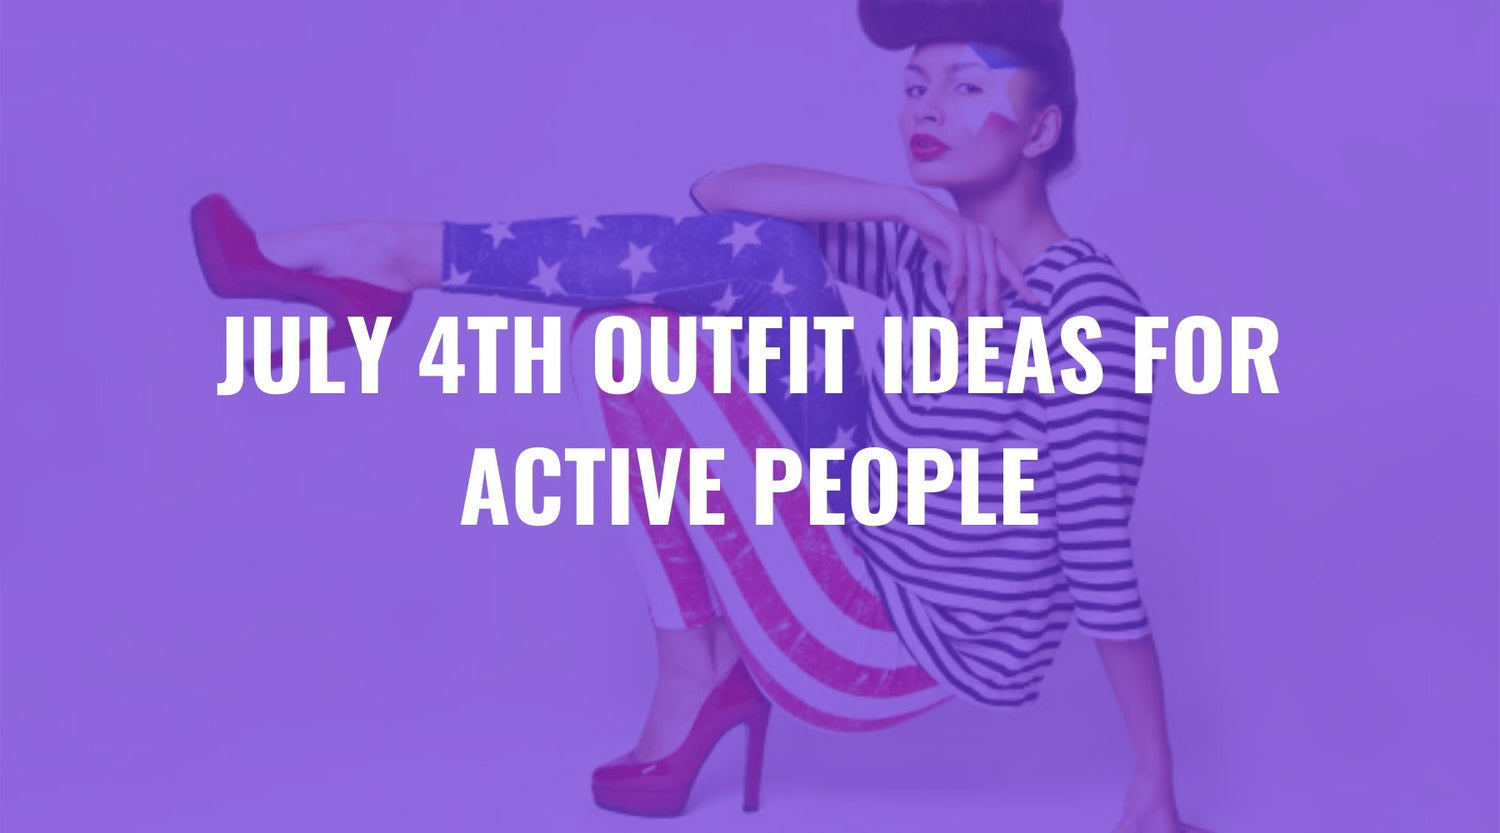 July 4th Outfit Ideas for Active People